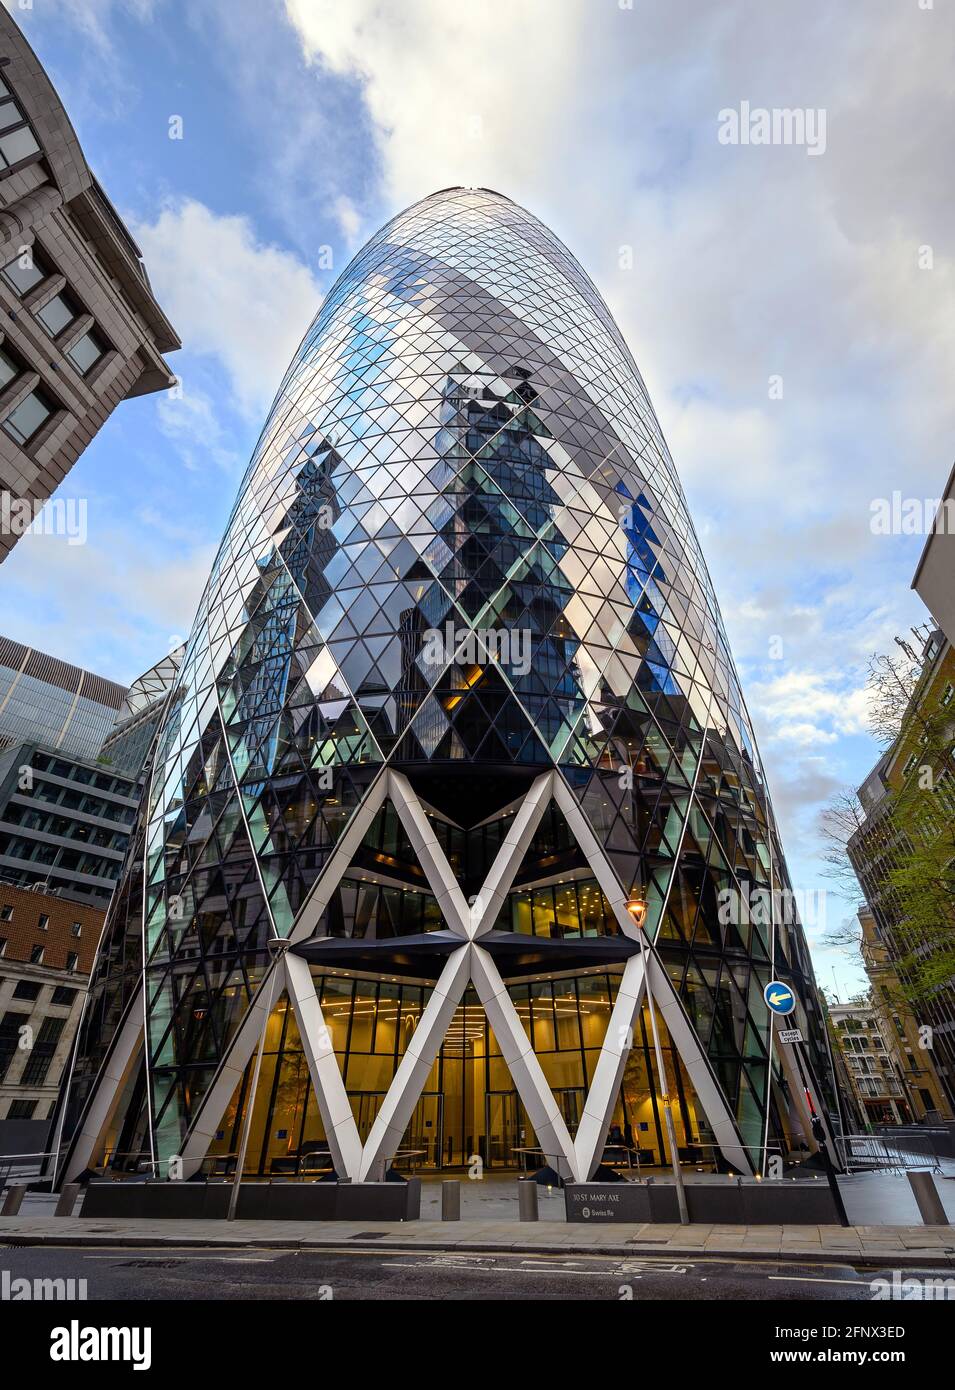 London, UK: Gherkin building in the City of London. View of the Gherkin or 30 St Mary Axe with very wide angle and perspective distortion. Stock Photo